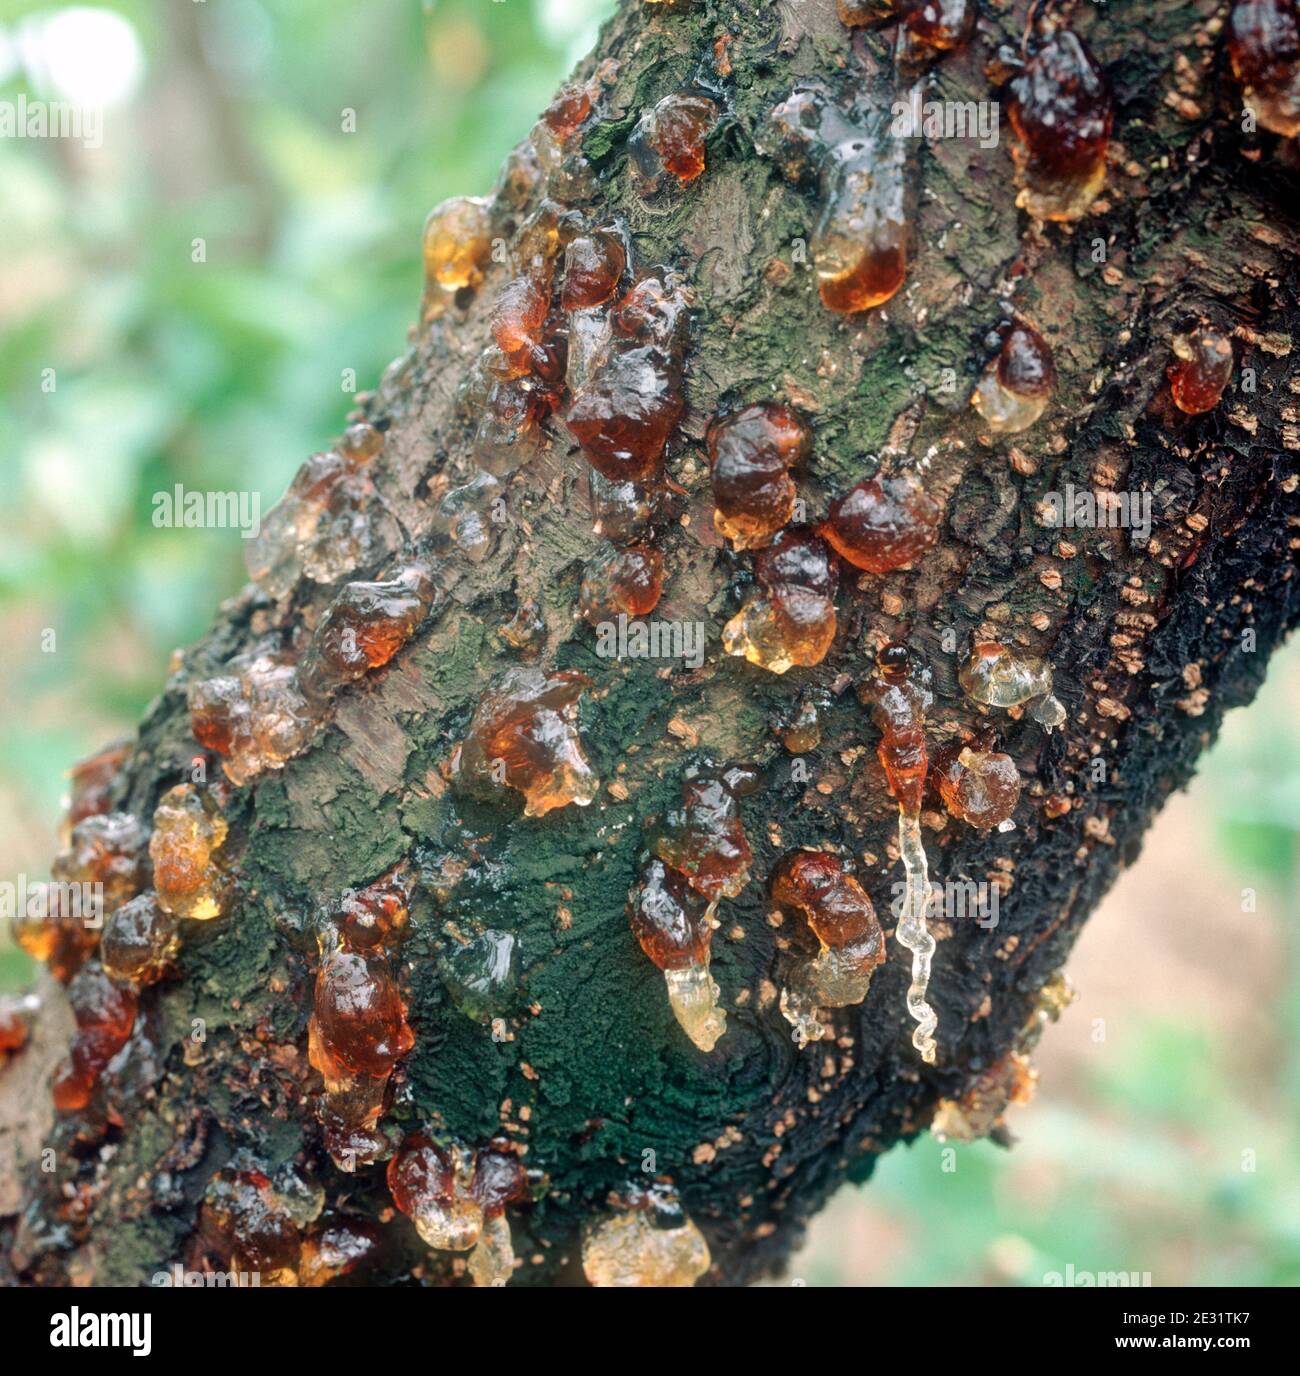 Severe bacterial blight Pseudomonas syringae) gummosis exudation on the trunk of a crop peach tree Stock Photo